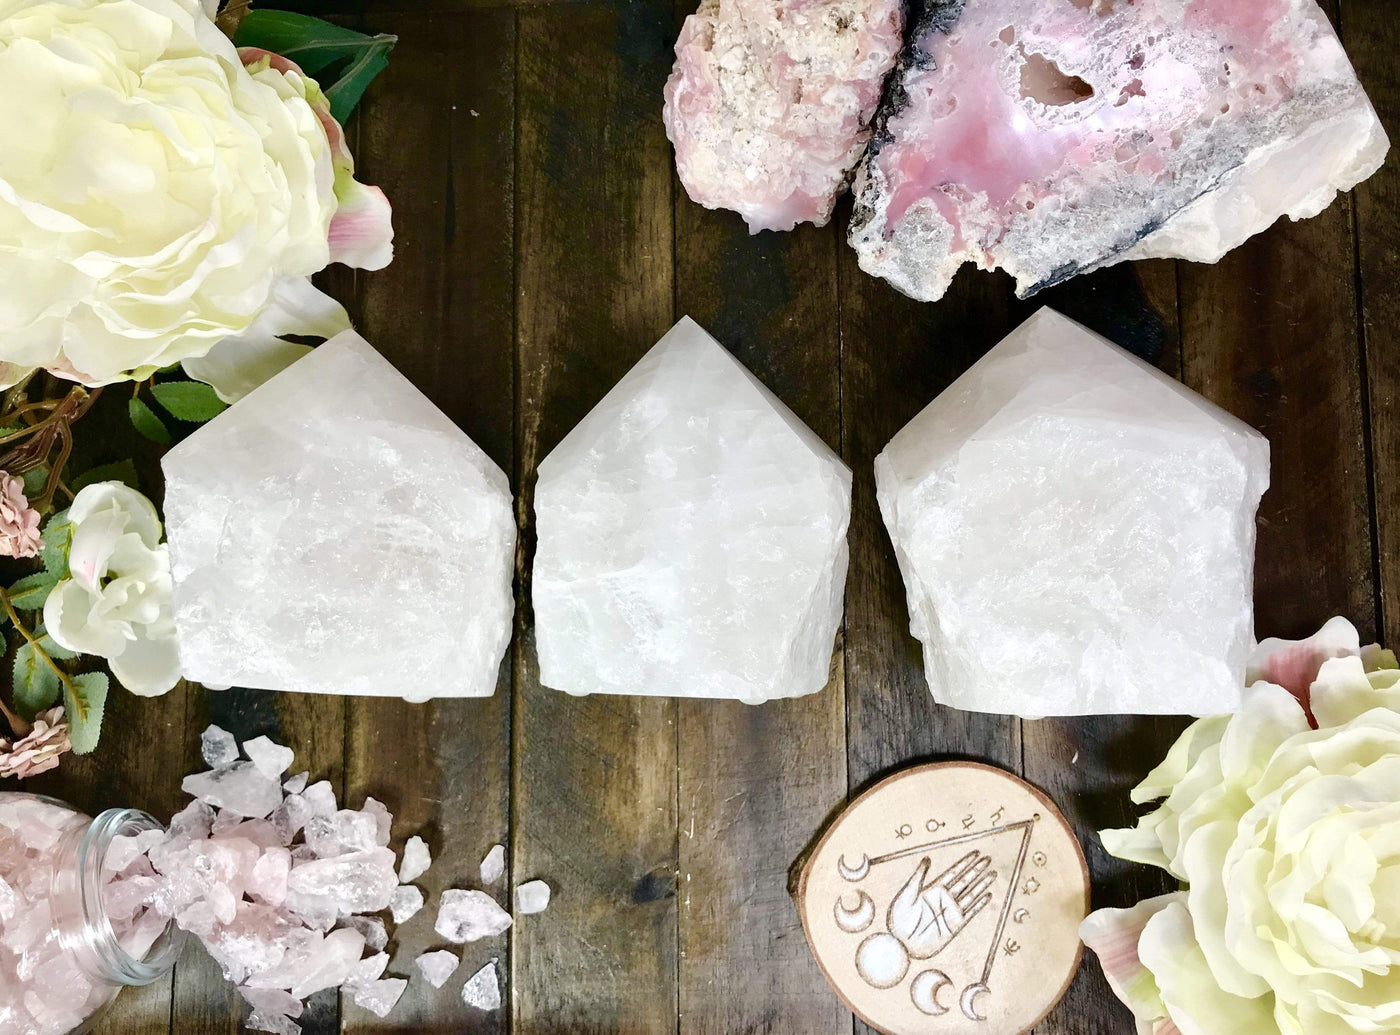 3 Crystal quartz Lamps lined up with crystals and flowers on wooden table